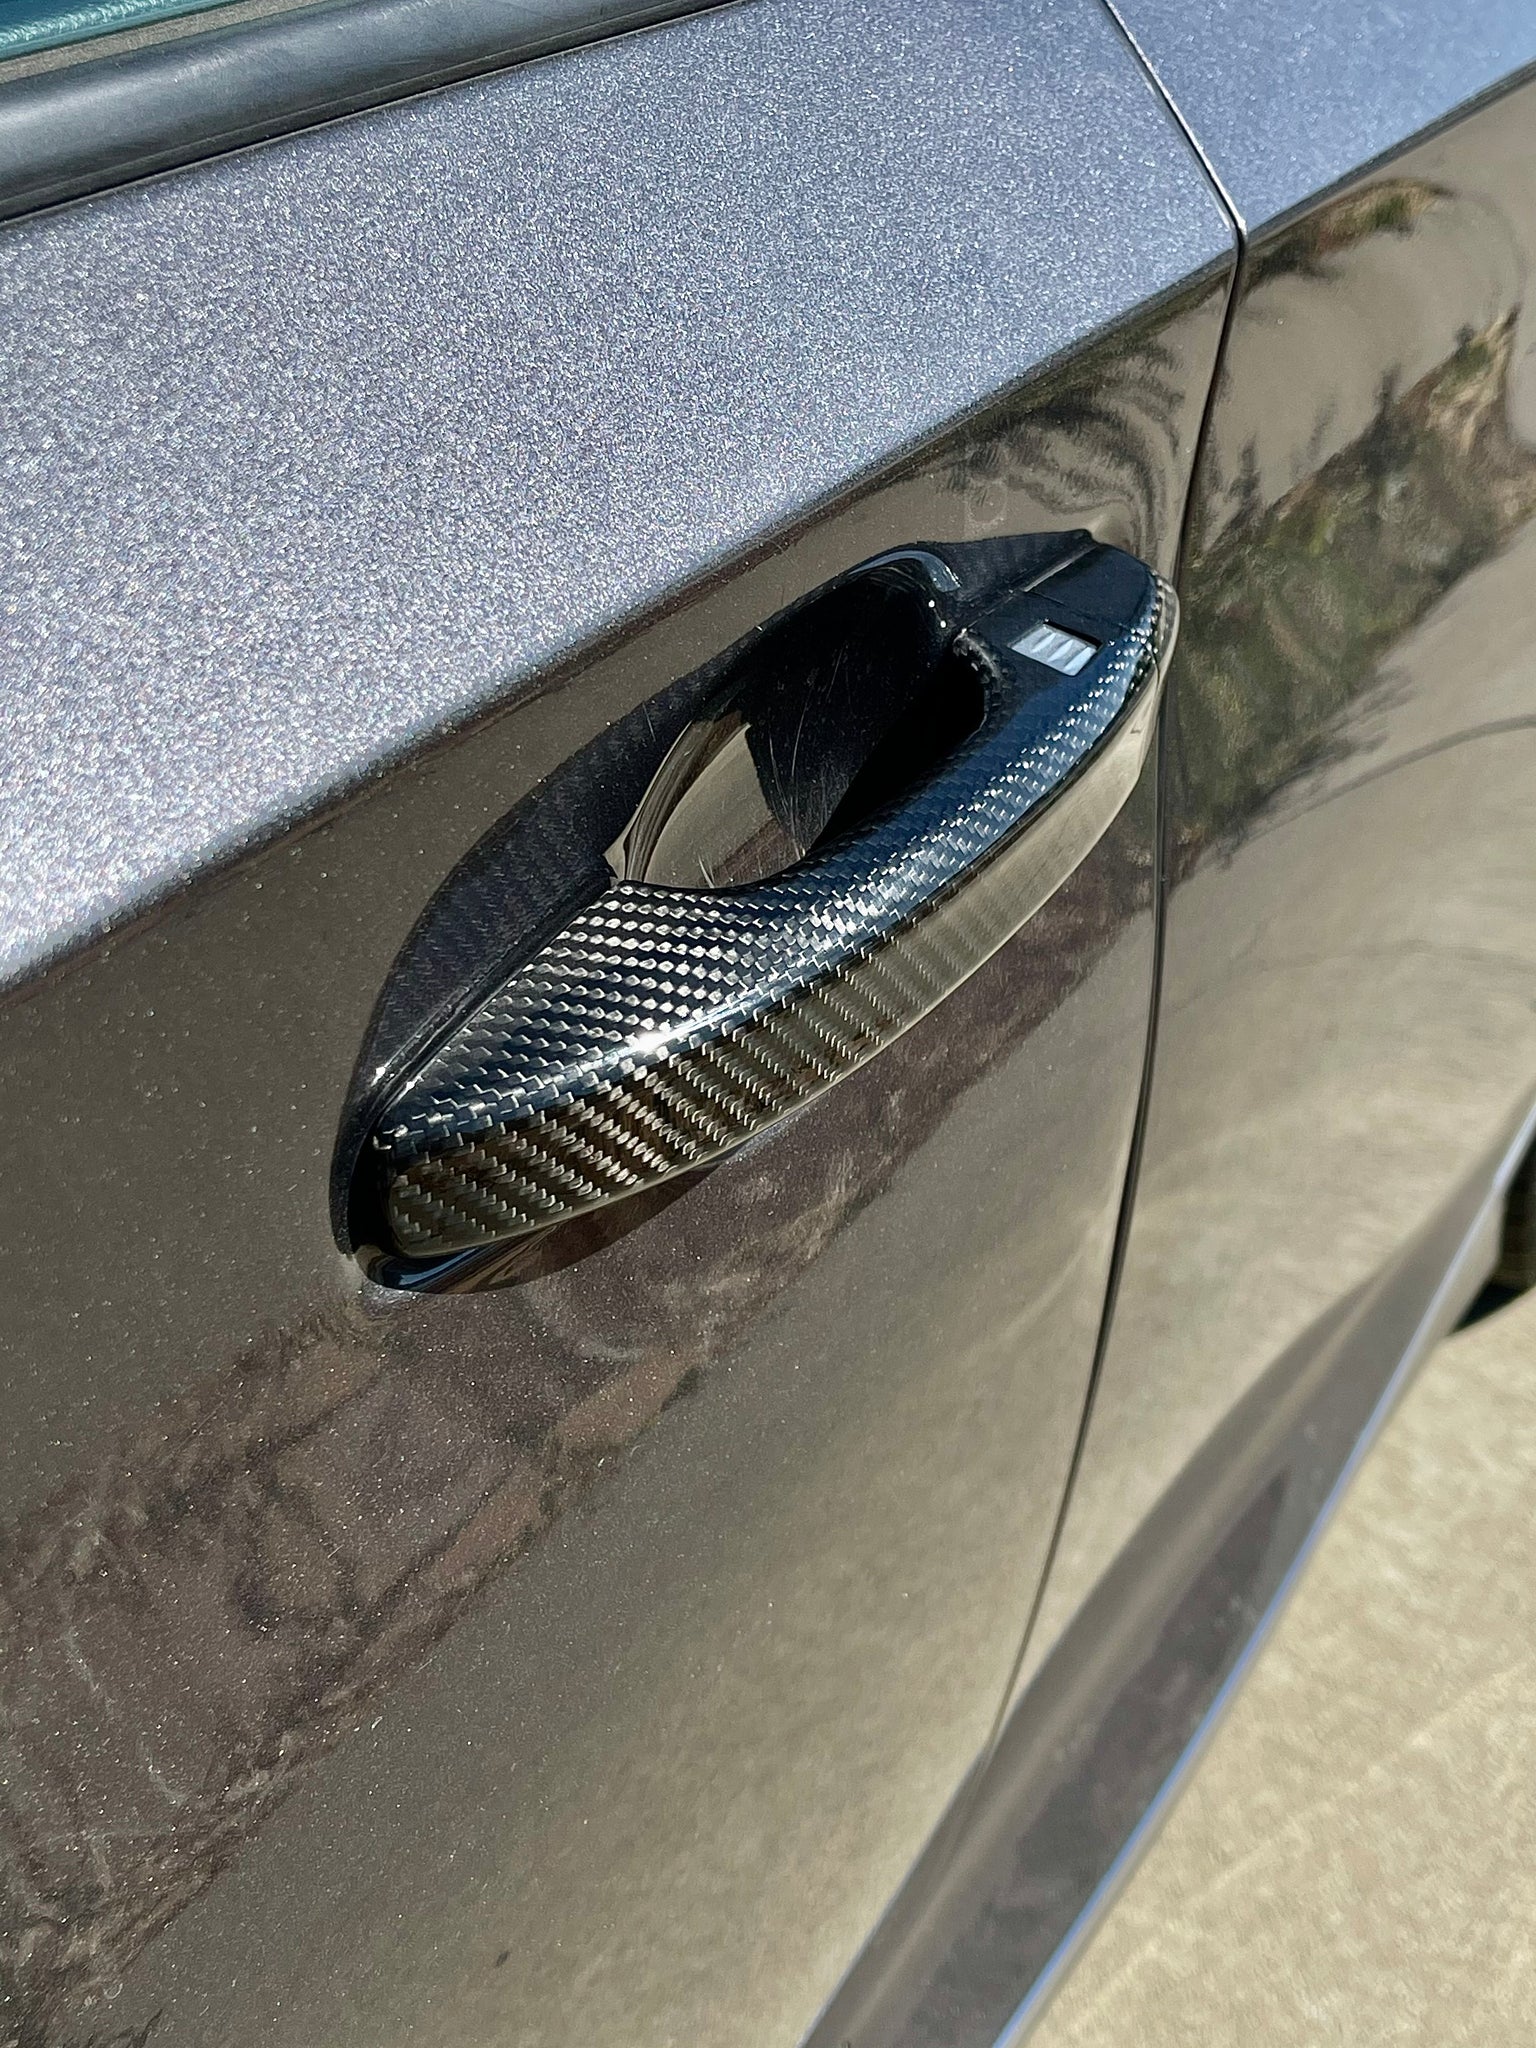 Synth Carbon Ceramic Coated Carbon Fiber Door Handle Covers for